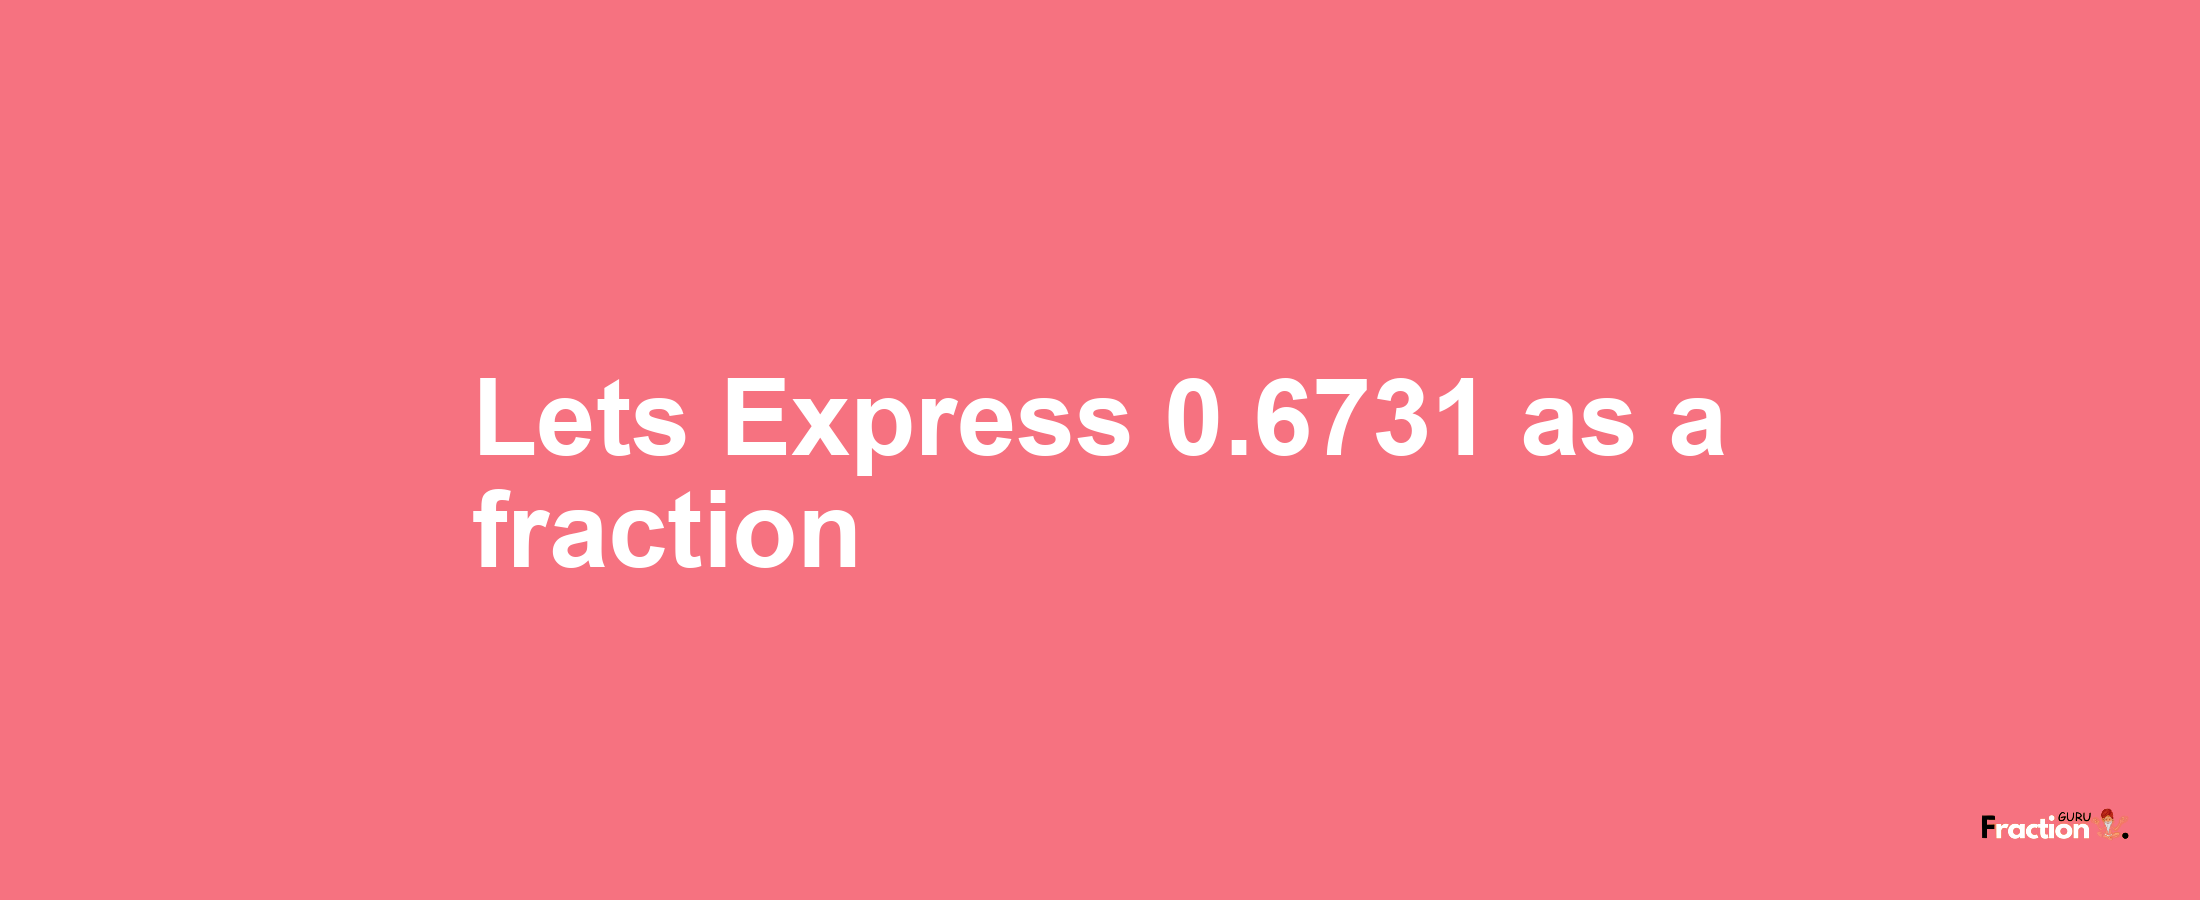 Lets Express 0.6731 as afraction